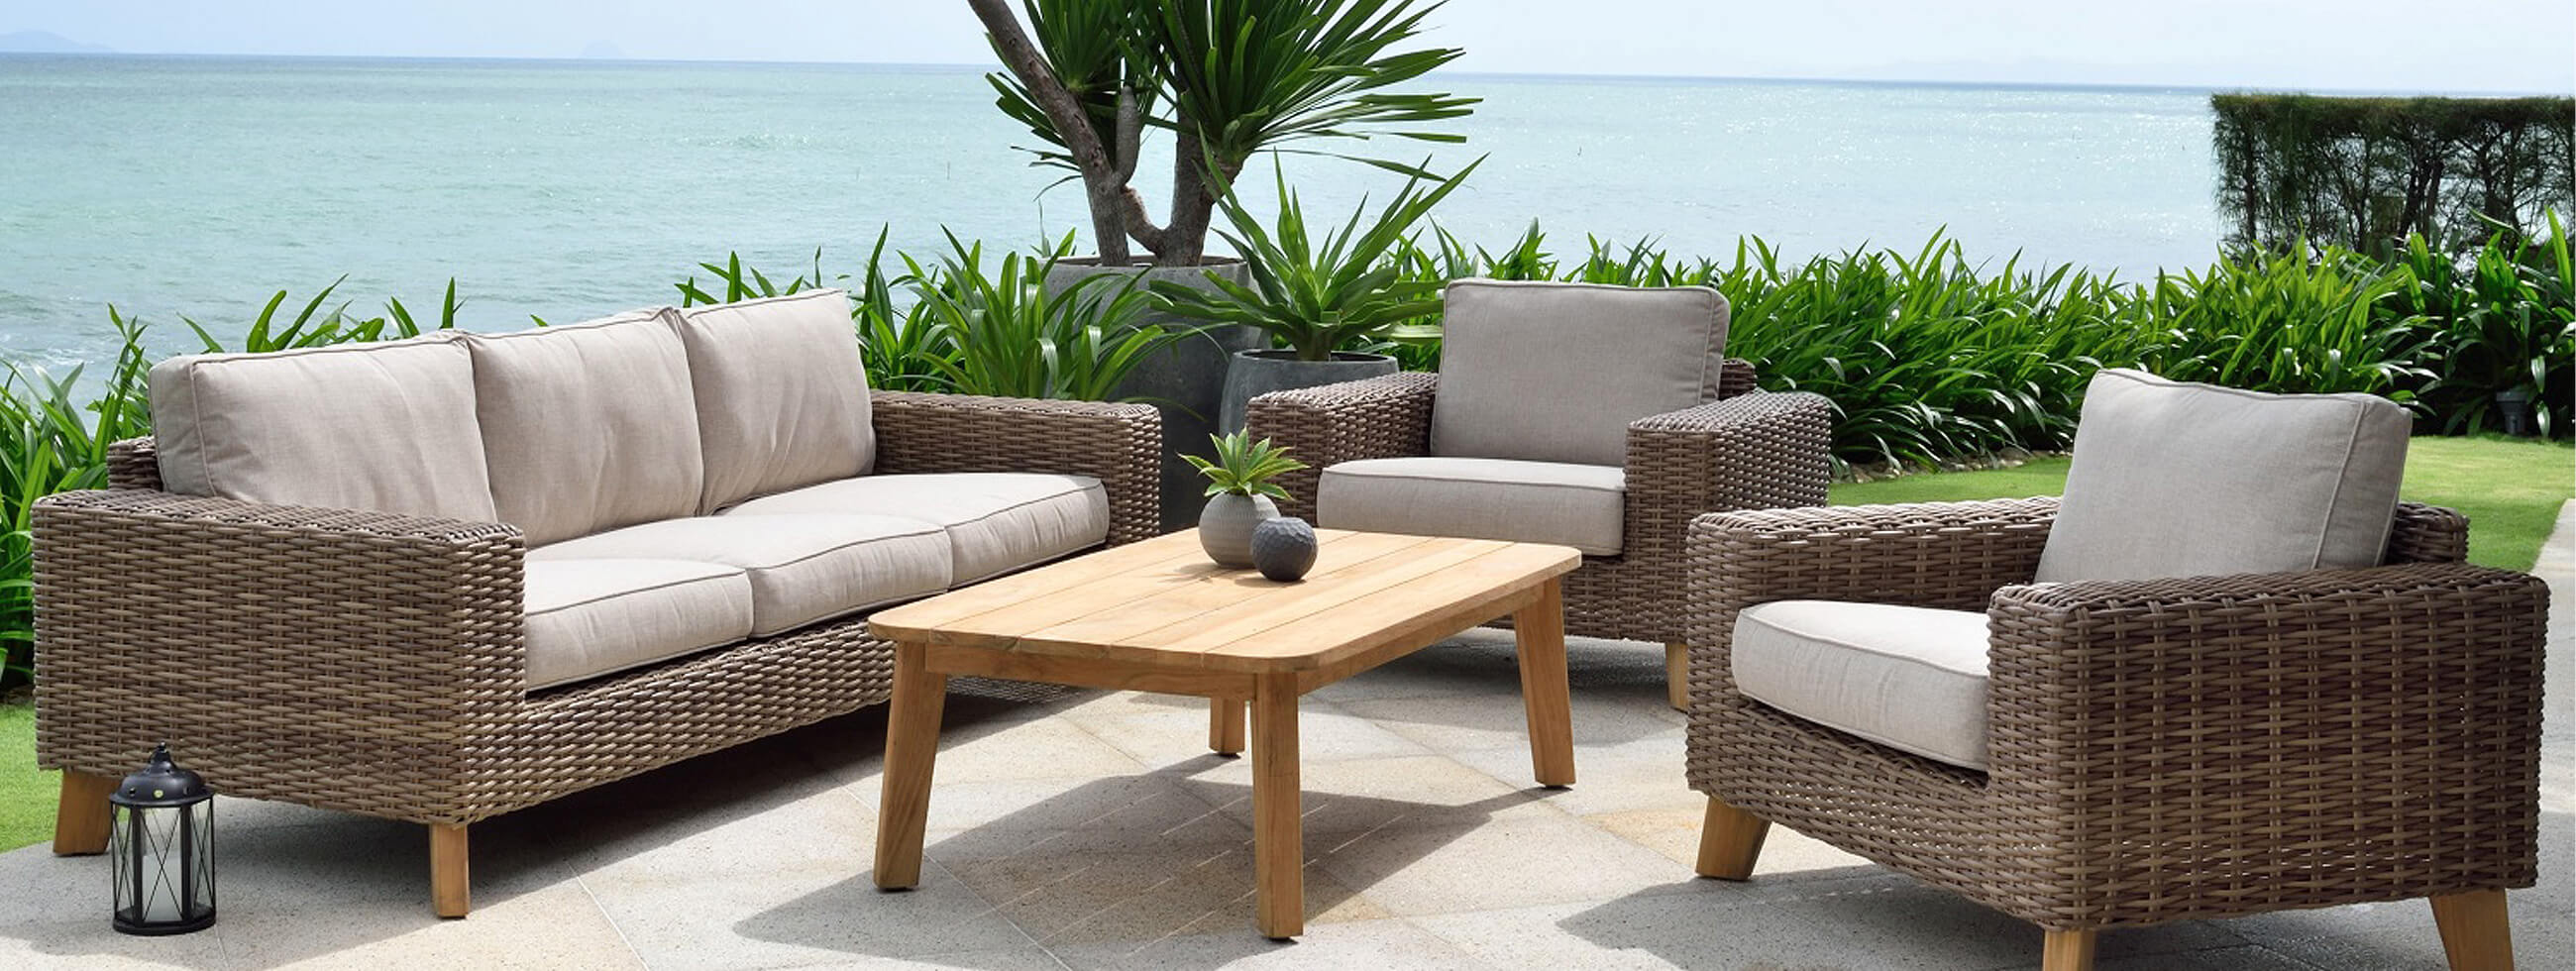 Bahamas Style Outdoor Set with Cocktail Table